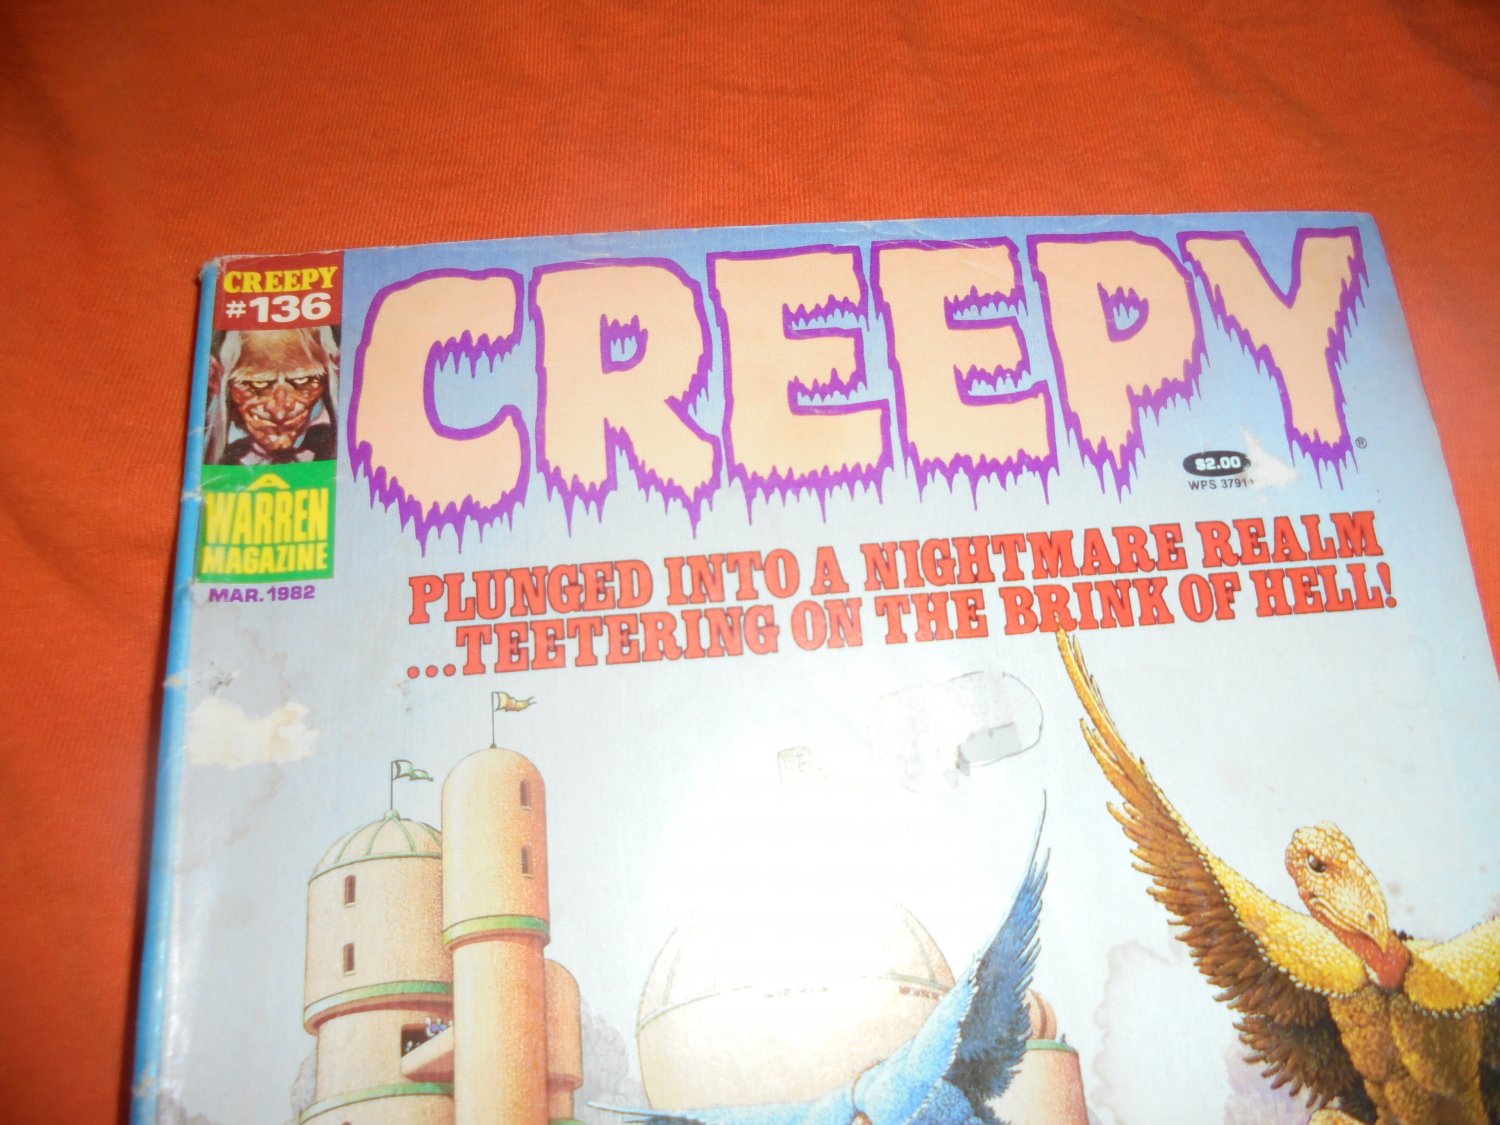 CREEPY MAGAZINE # 136 * March 1982 * GD * $4.00 or Best Offer!!